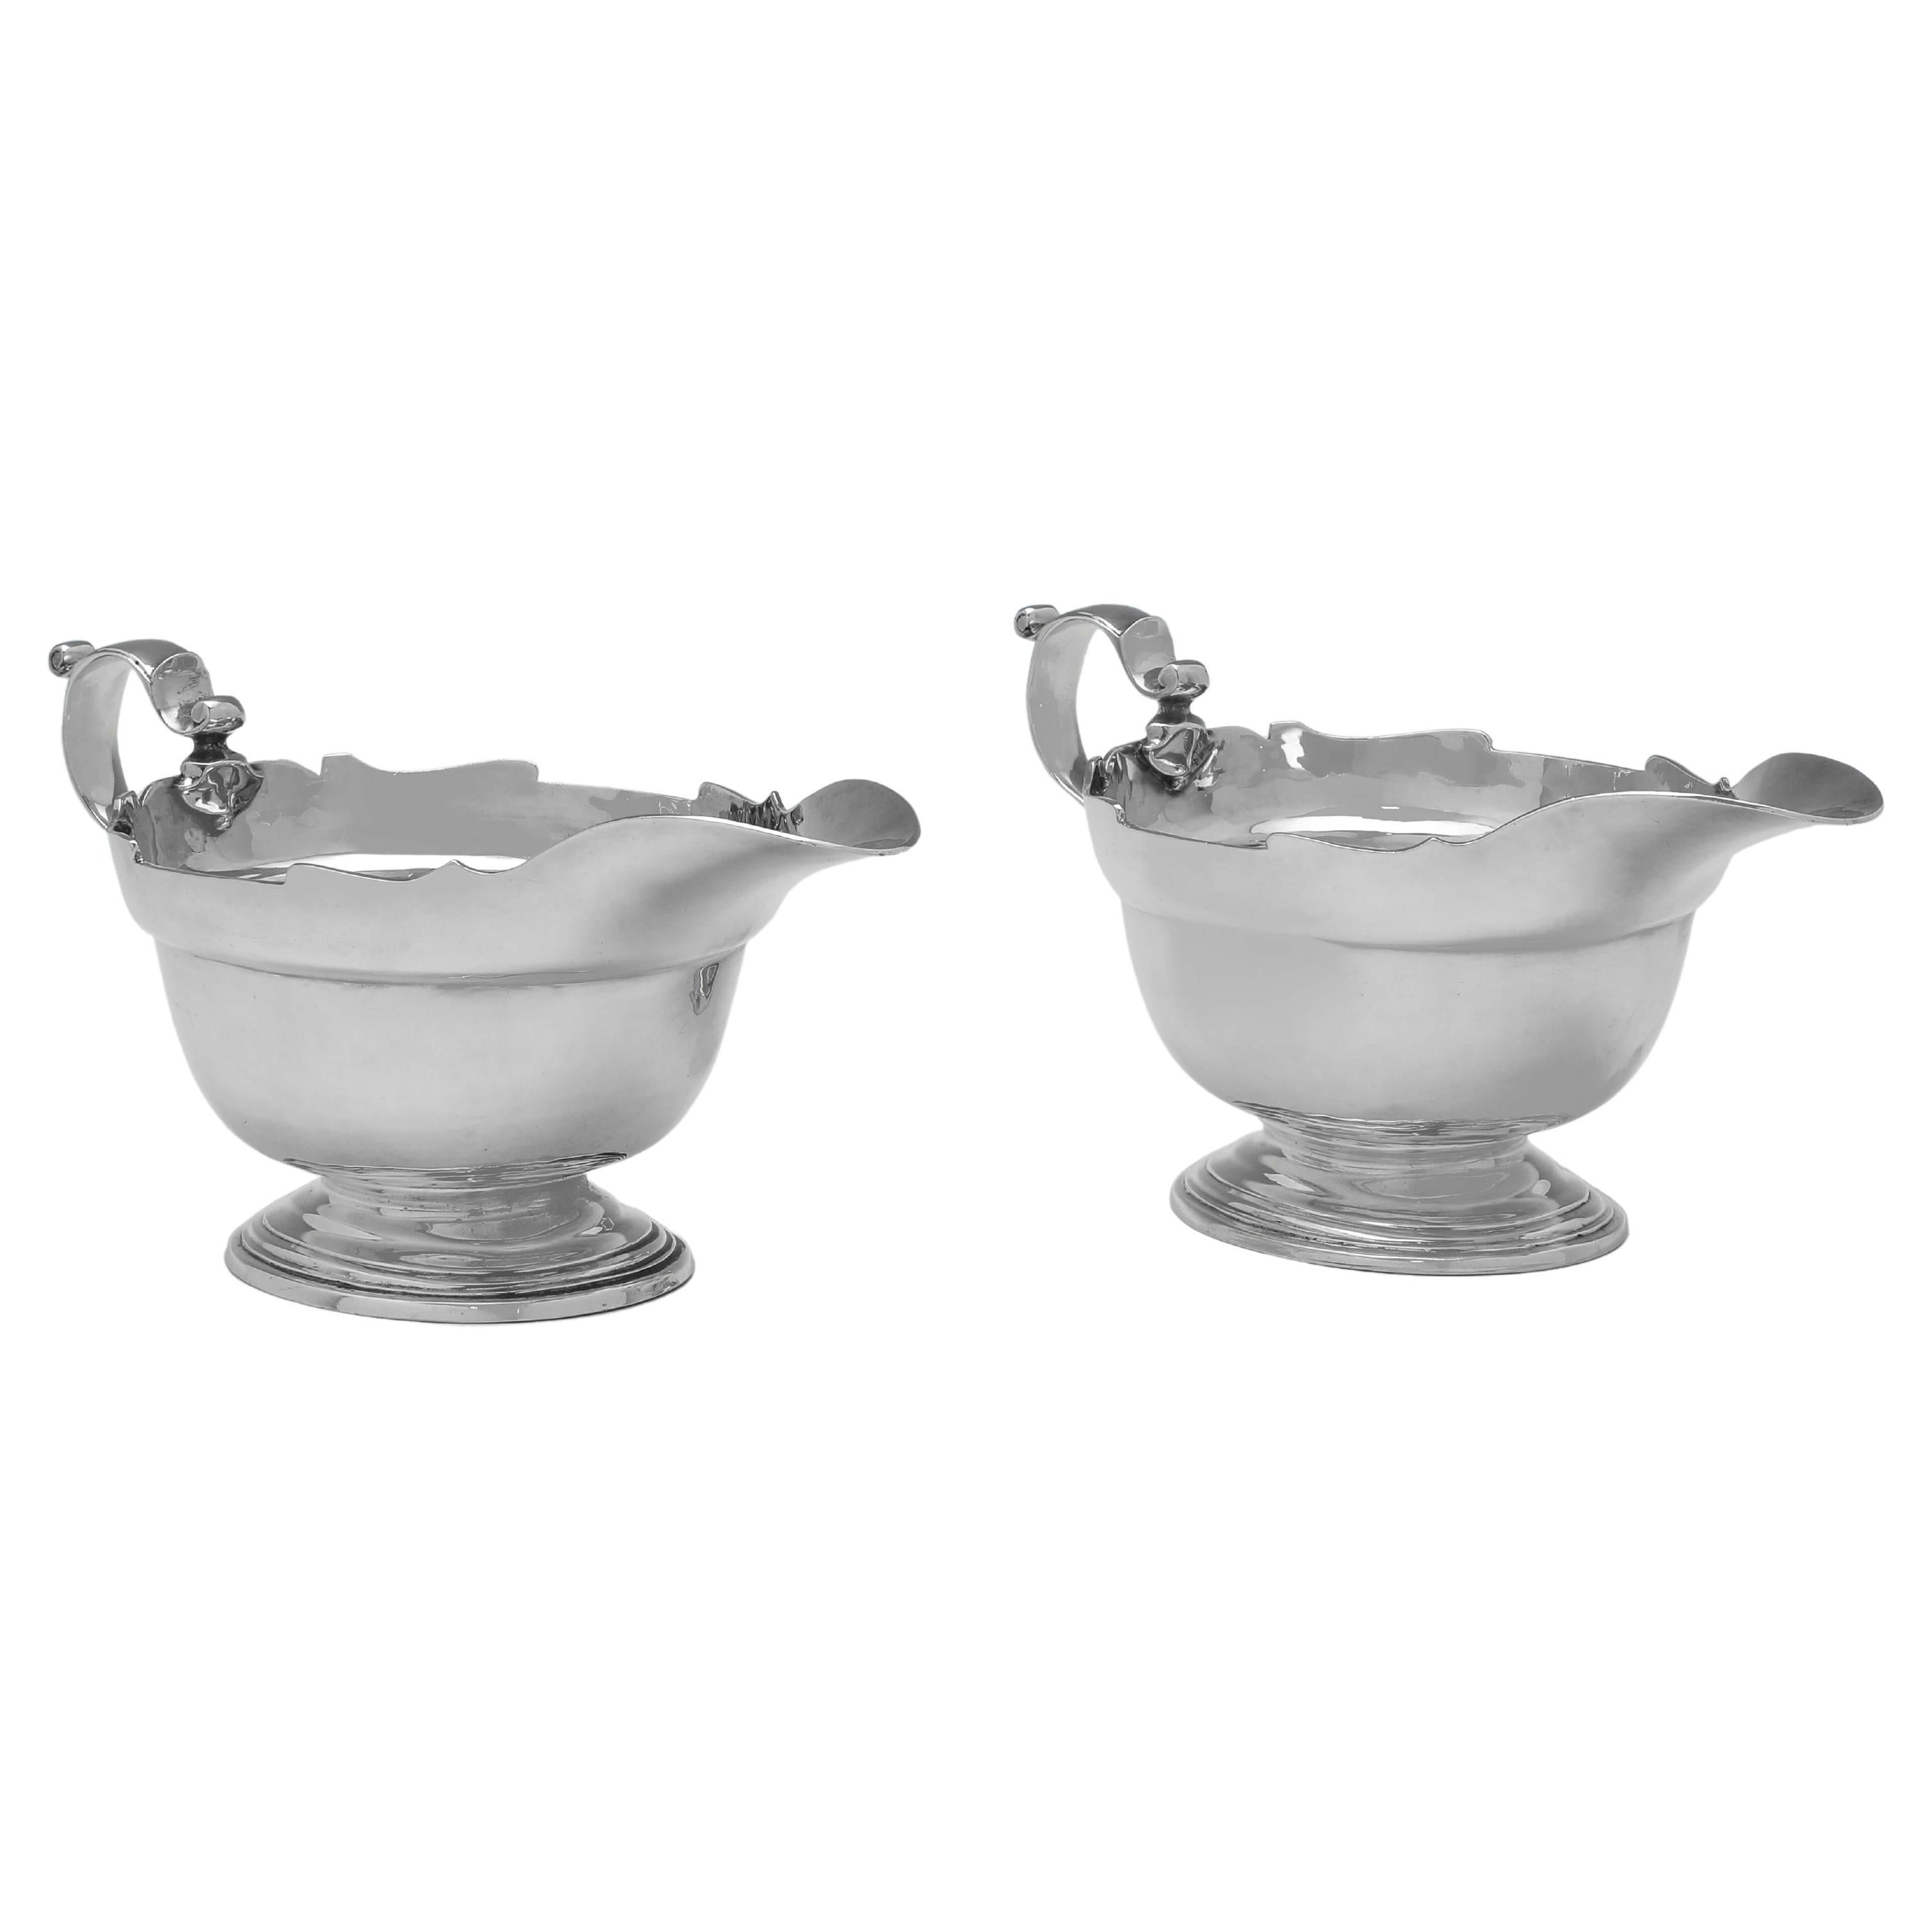 Heavy Art Deco Period Pair of Sterling Silver Gravy Boats, London 1932 / 1933